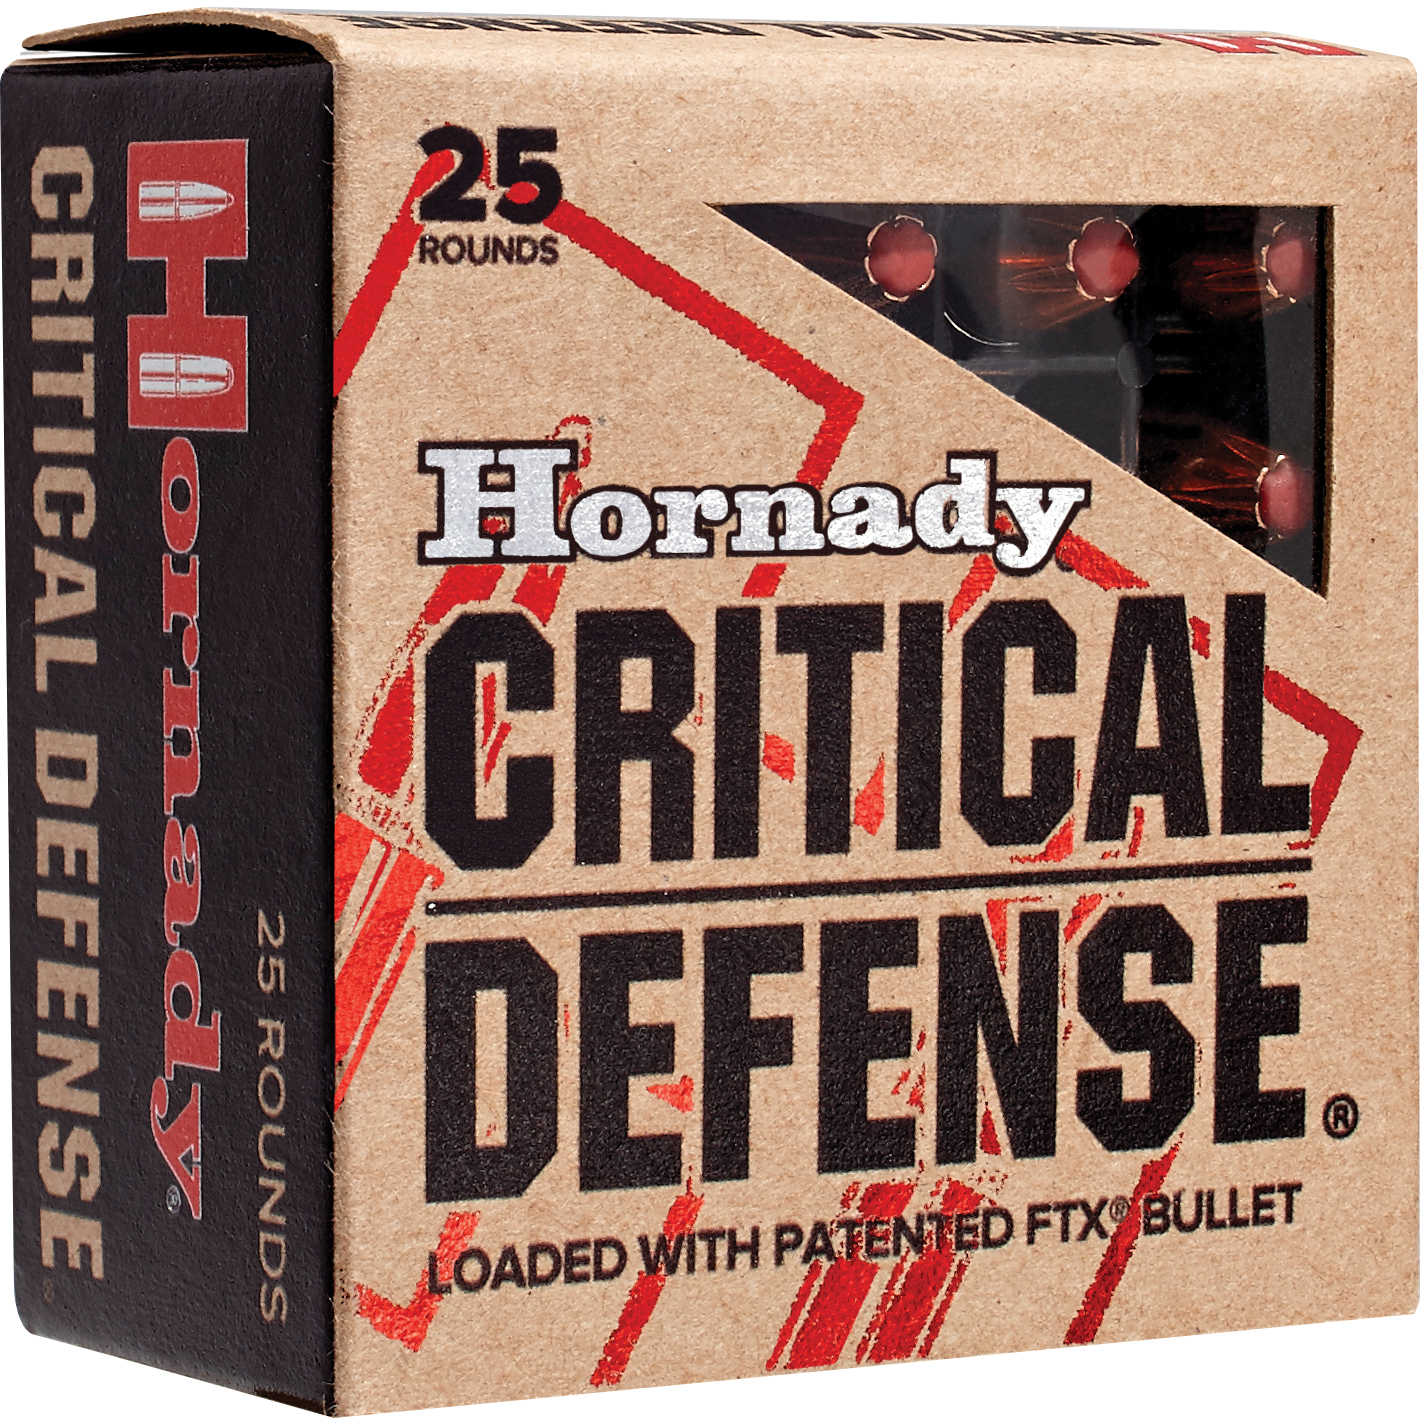 32 ACP 25 Rounds Ammunition Hornady 60 Grain Jacketed Hollow Point